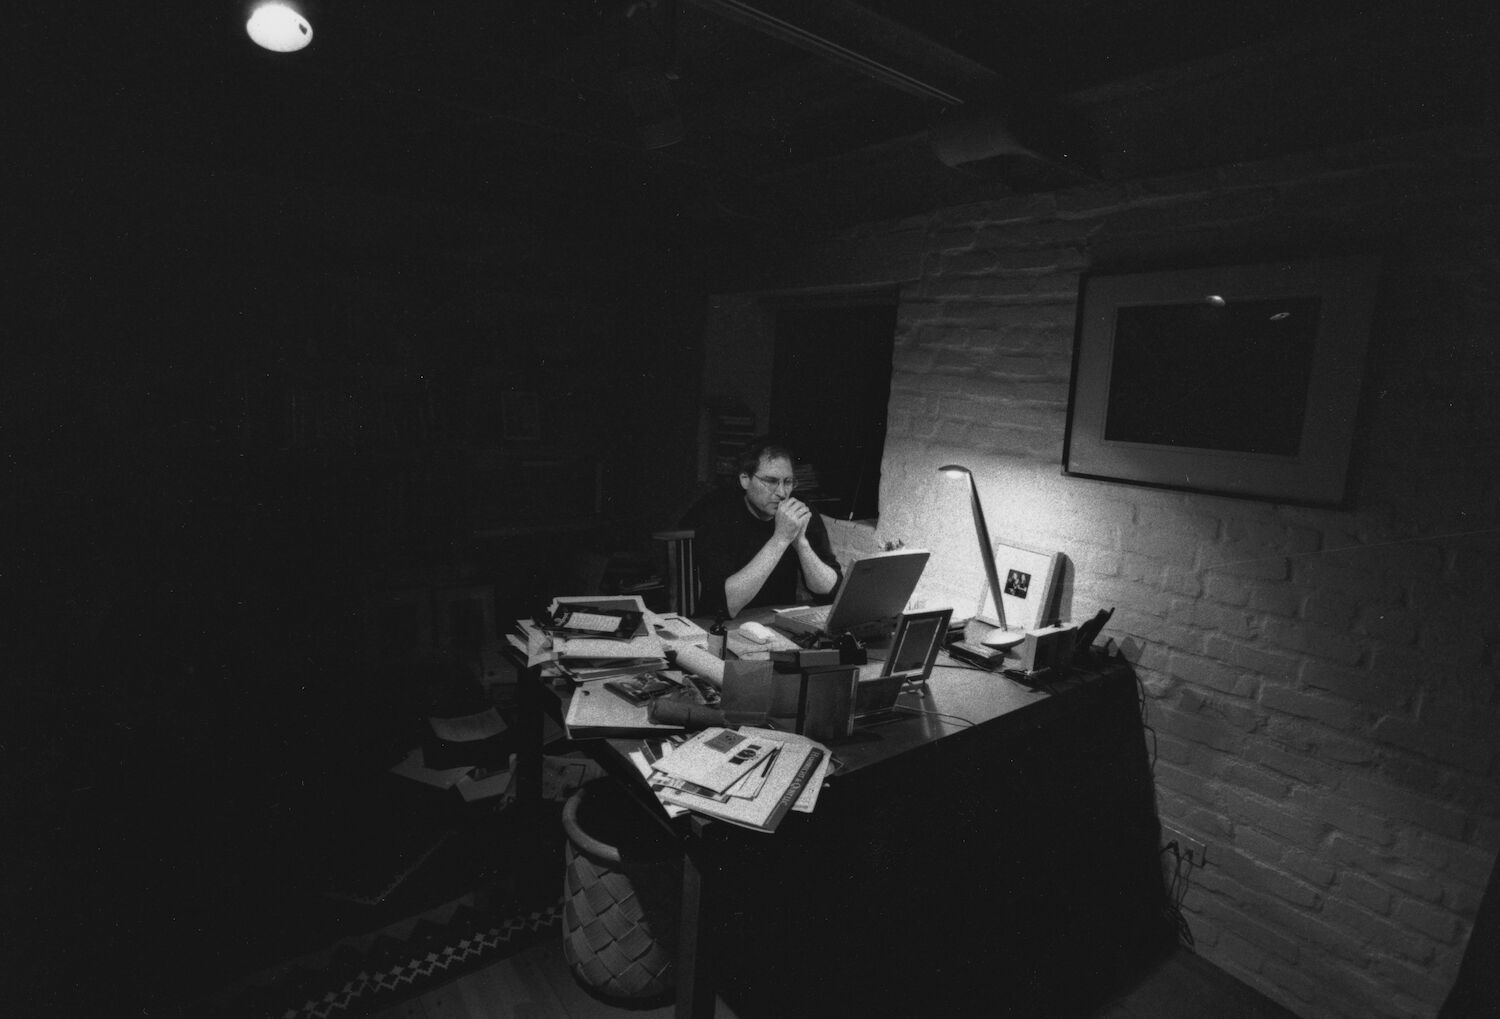 In his dark home office, a small lamp illuminates Steve as he sits at a cluttered desk.